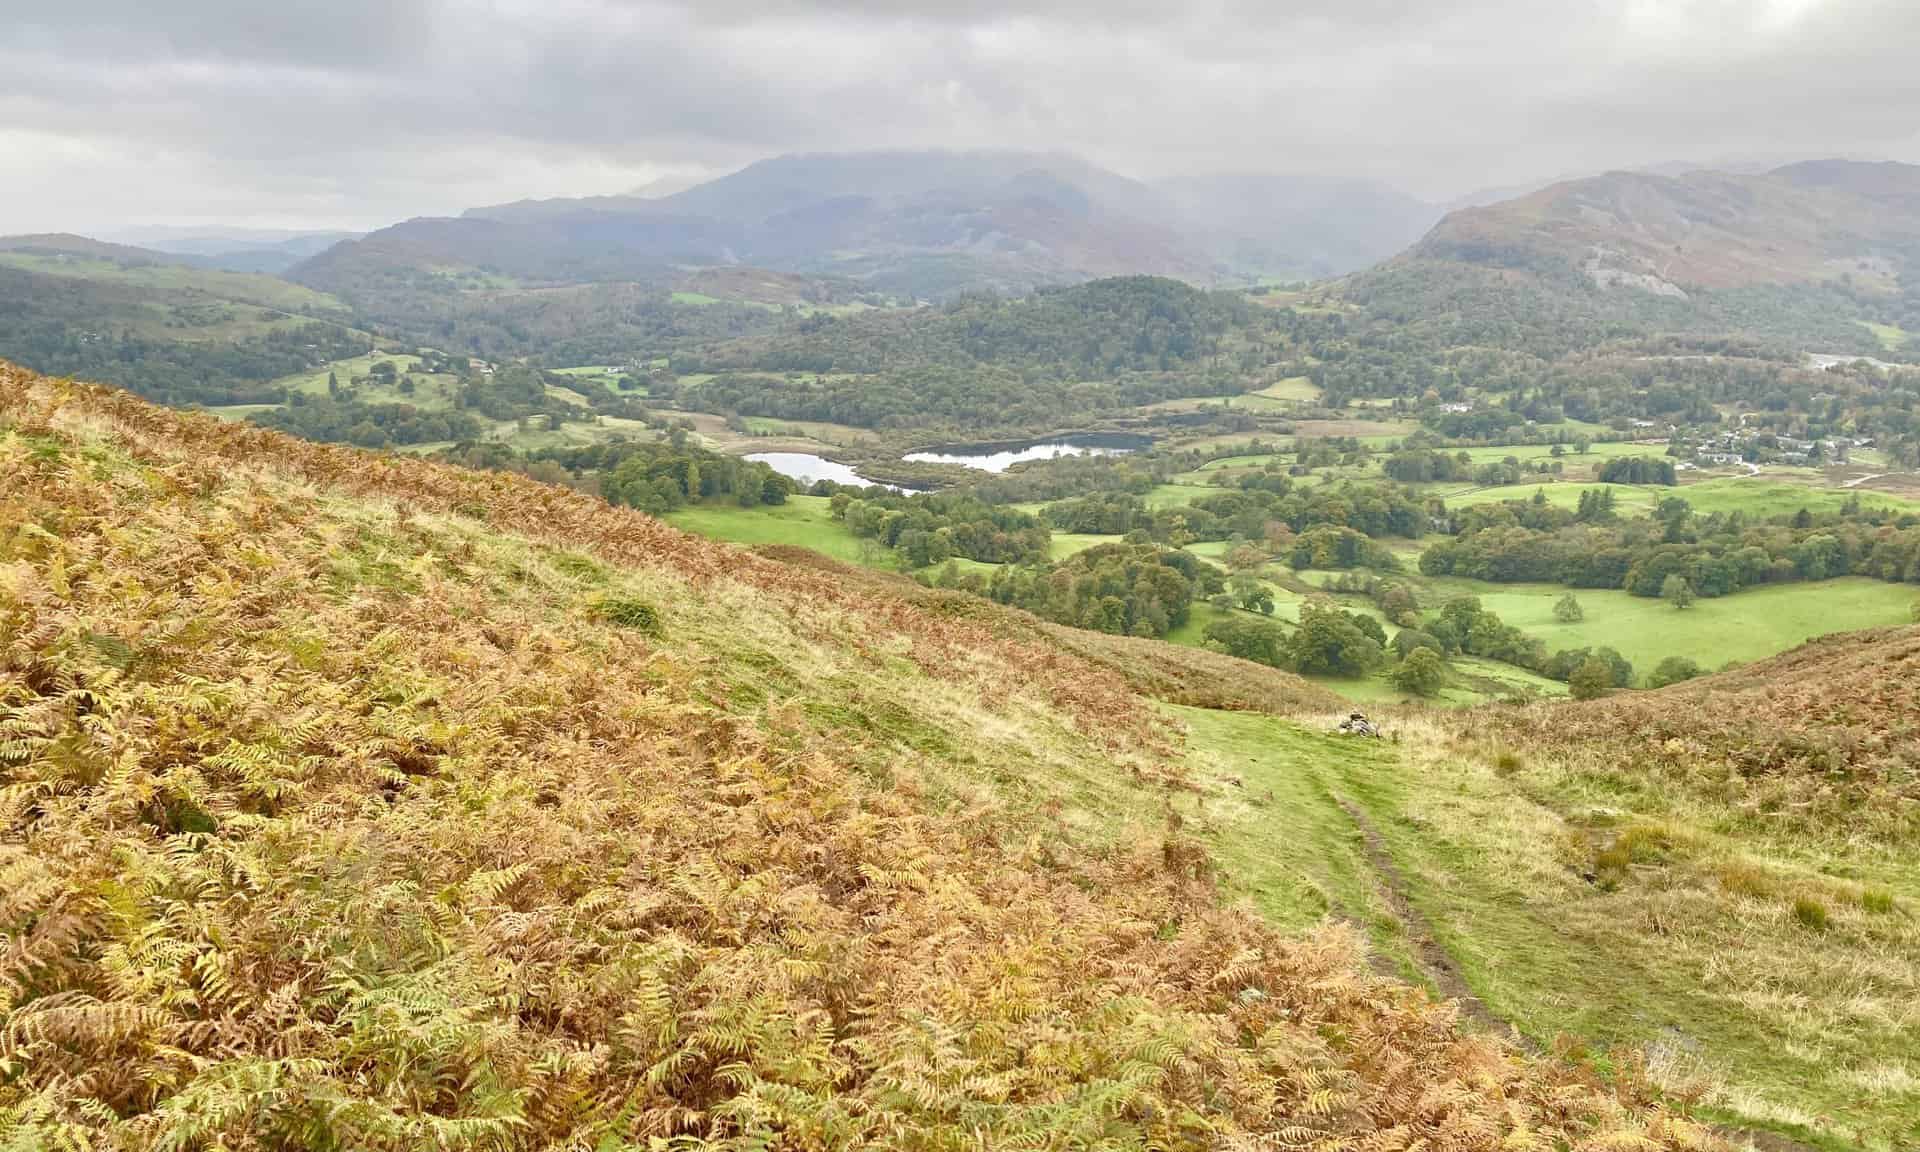 The view south-west towards Elter Water from Loughrigg Fell's Lad Crag. Lingmoor Fell is to the right of the lake and Wetherlam is in the background.